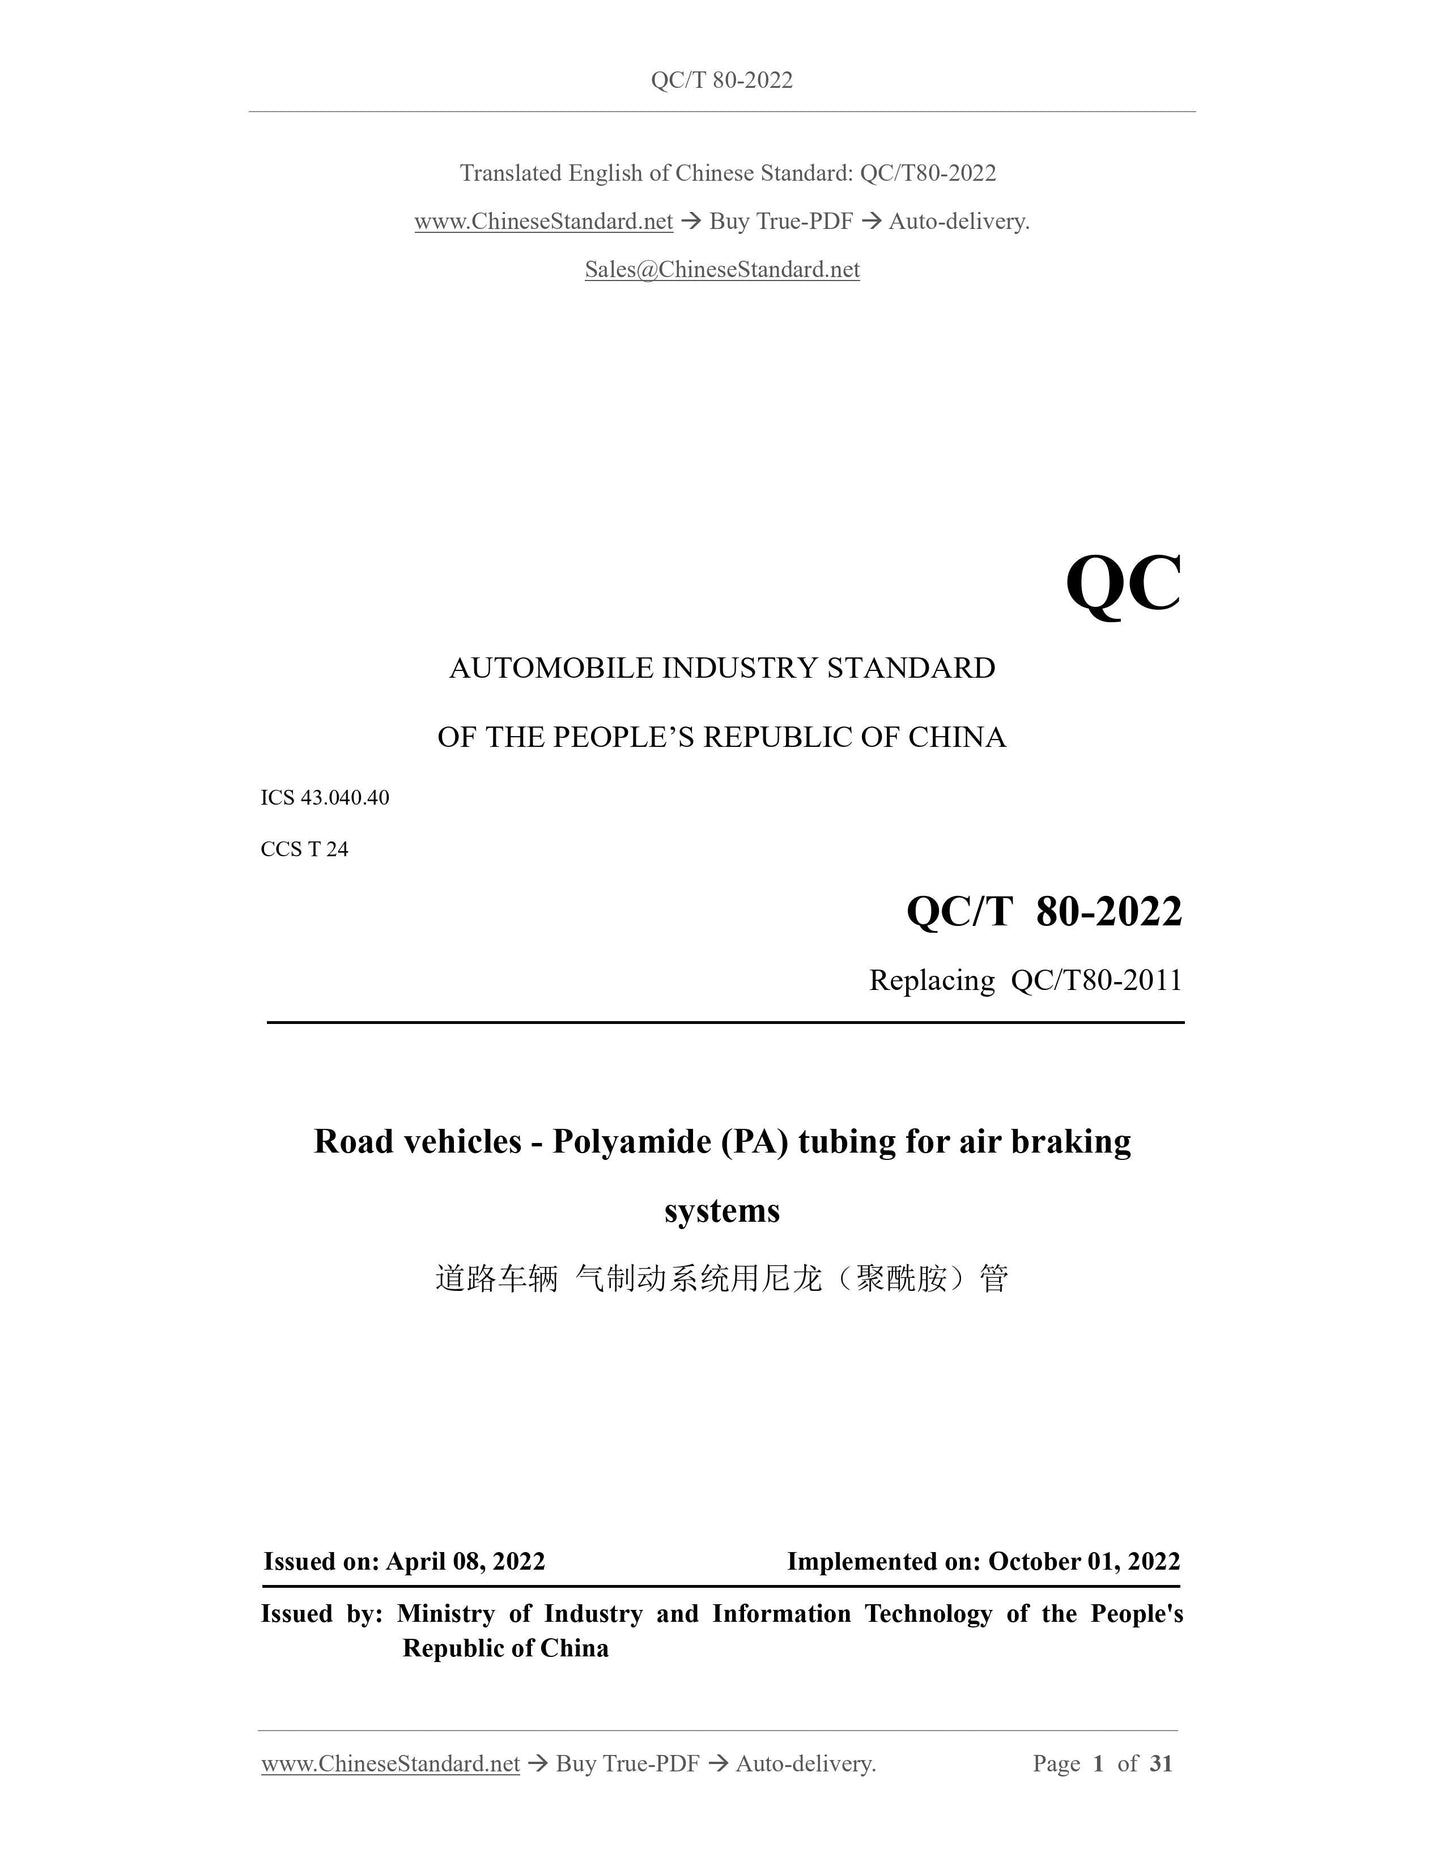 QC/T 80-2022 Page 1